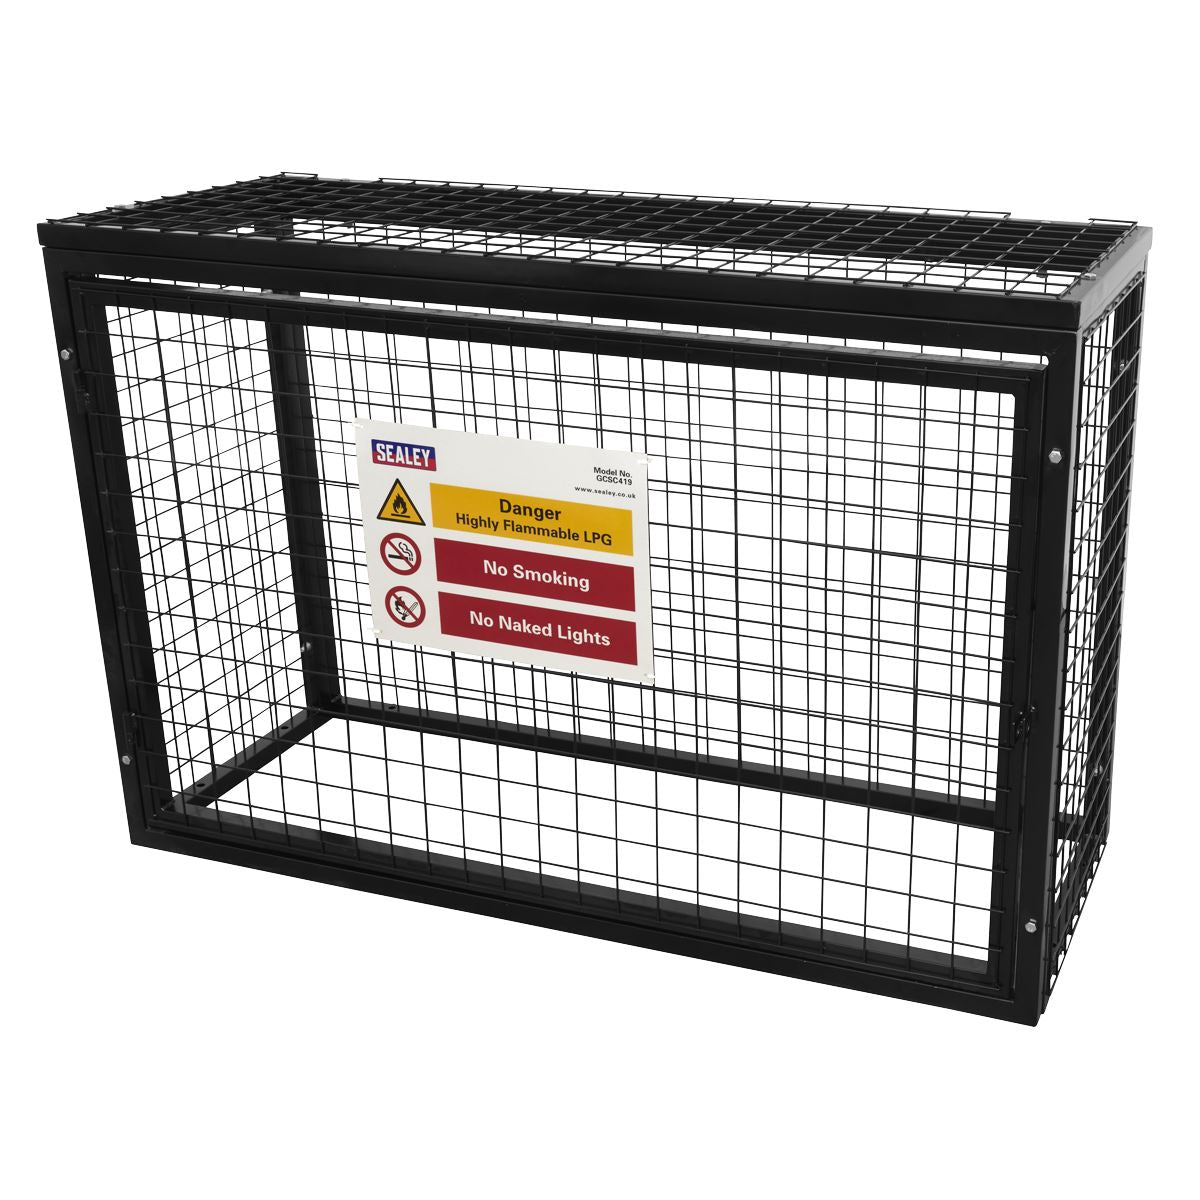 Sealey Safety Cage - 4 x 19kg Gas Cylinders GCSC419